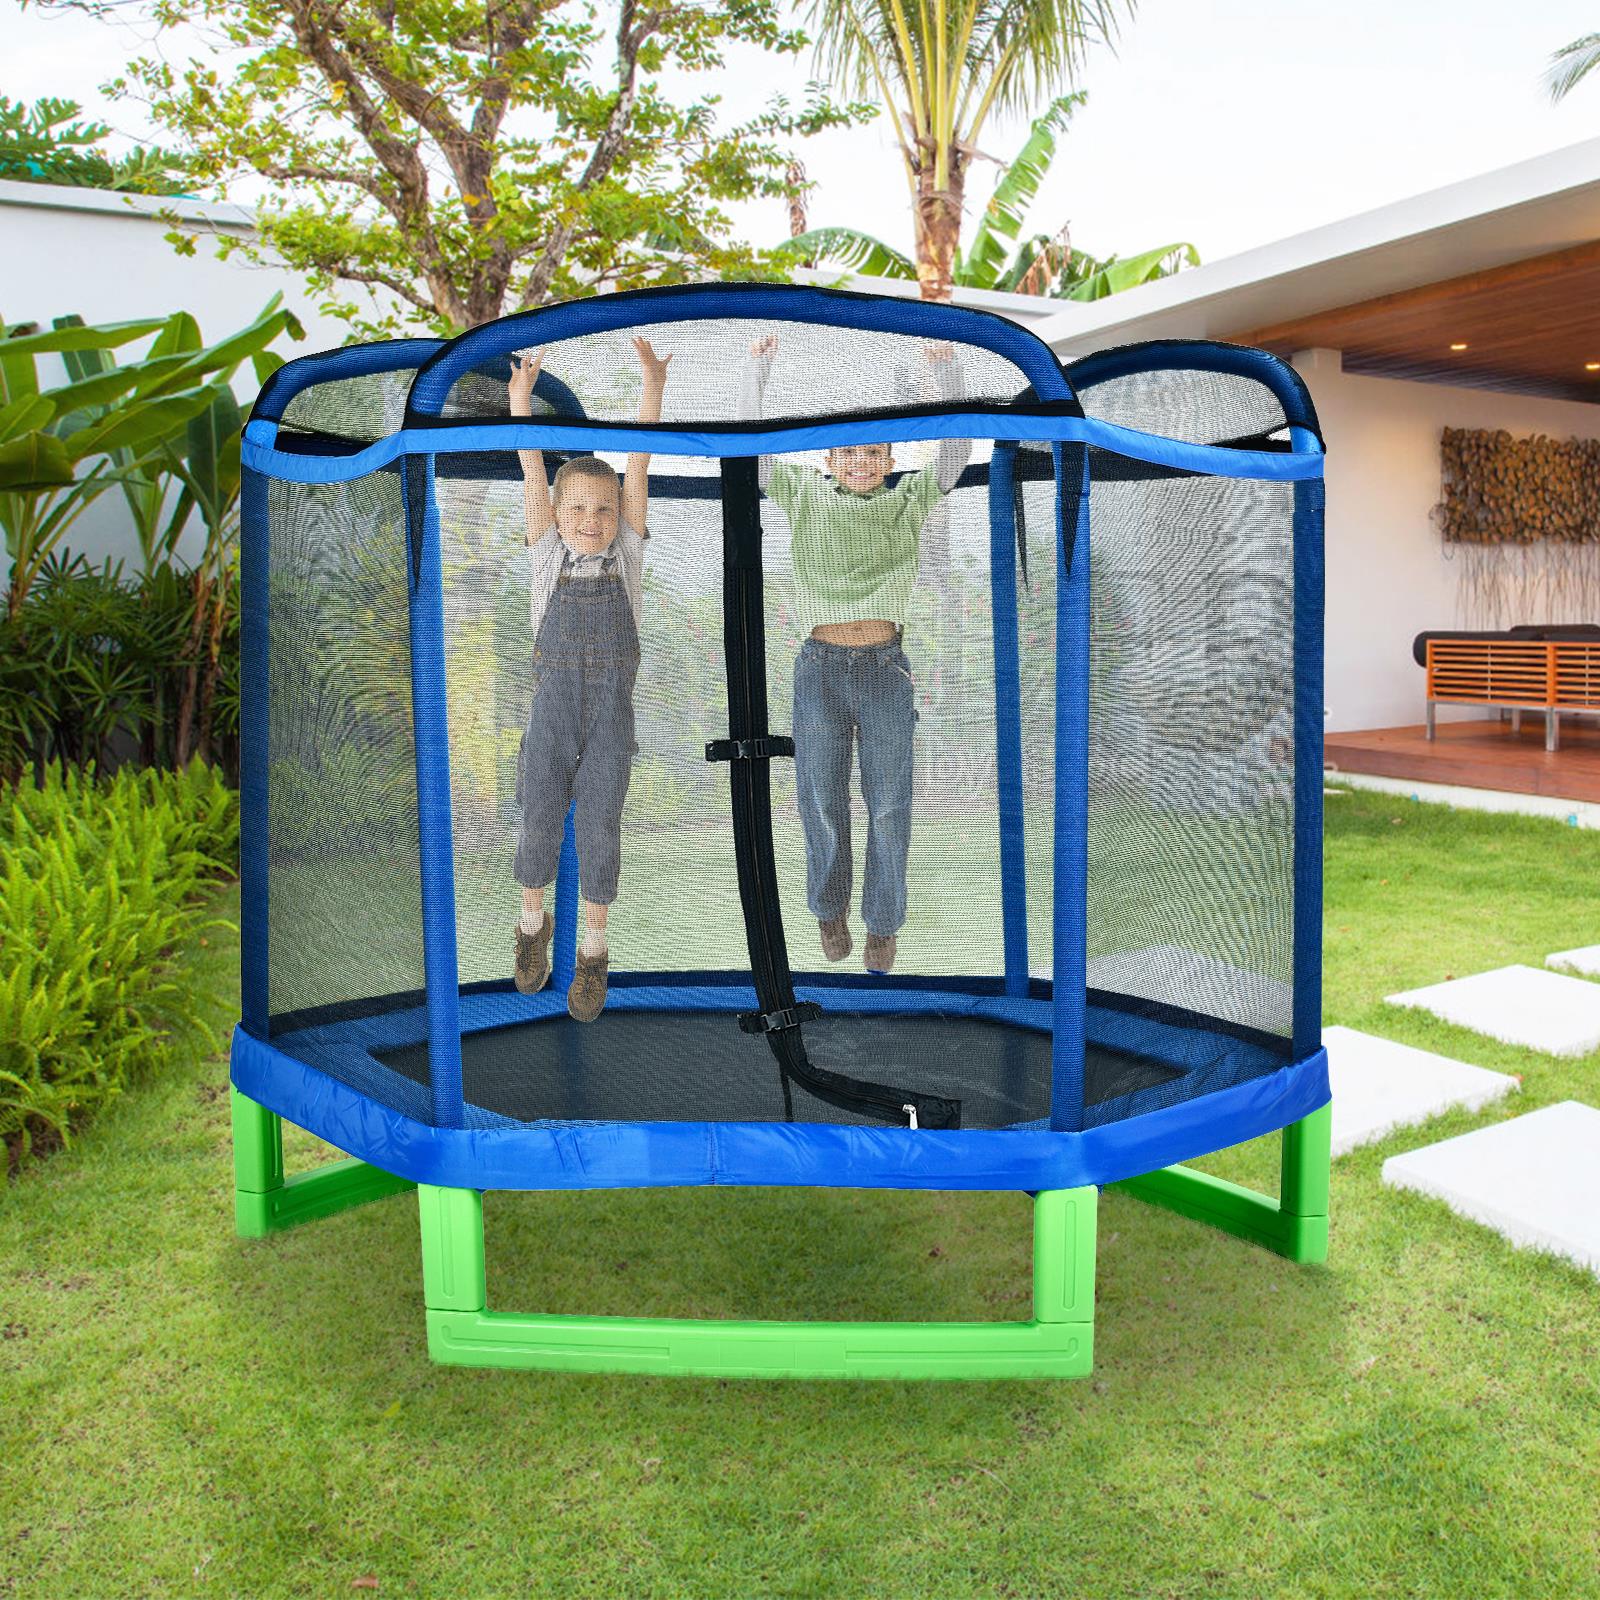 UBesGoo 7 ft Diameter Kids Trampoline, for Jumpping Playing